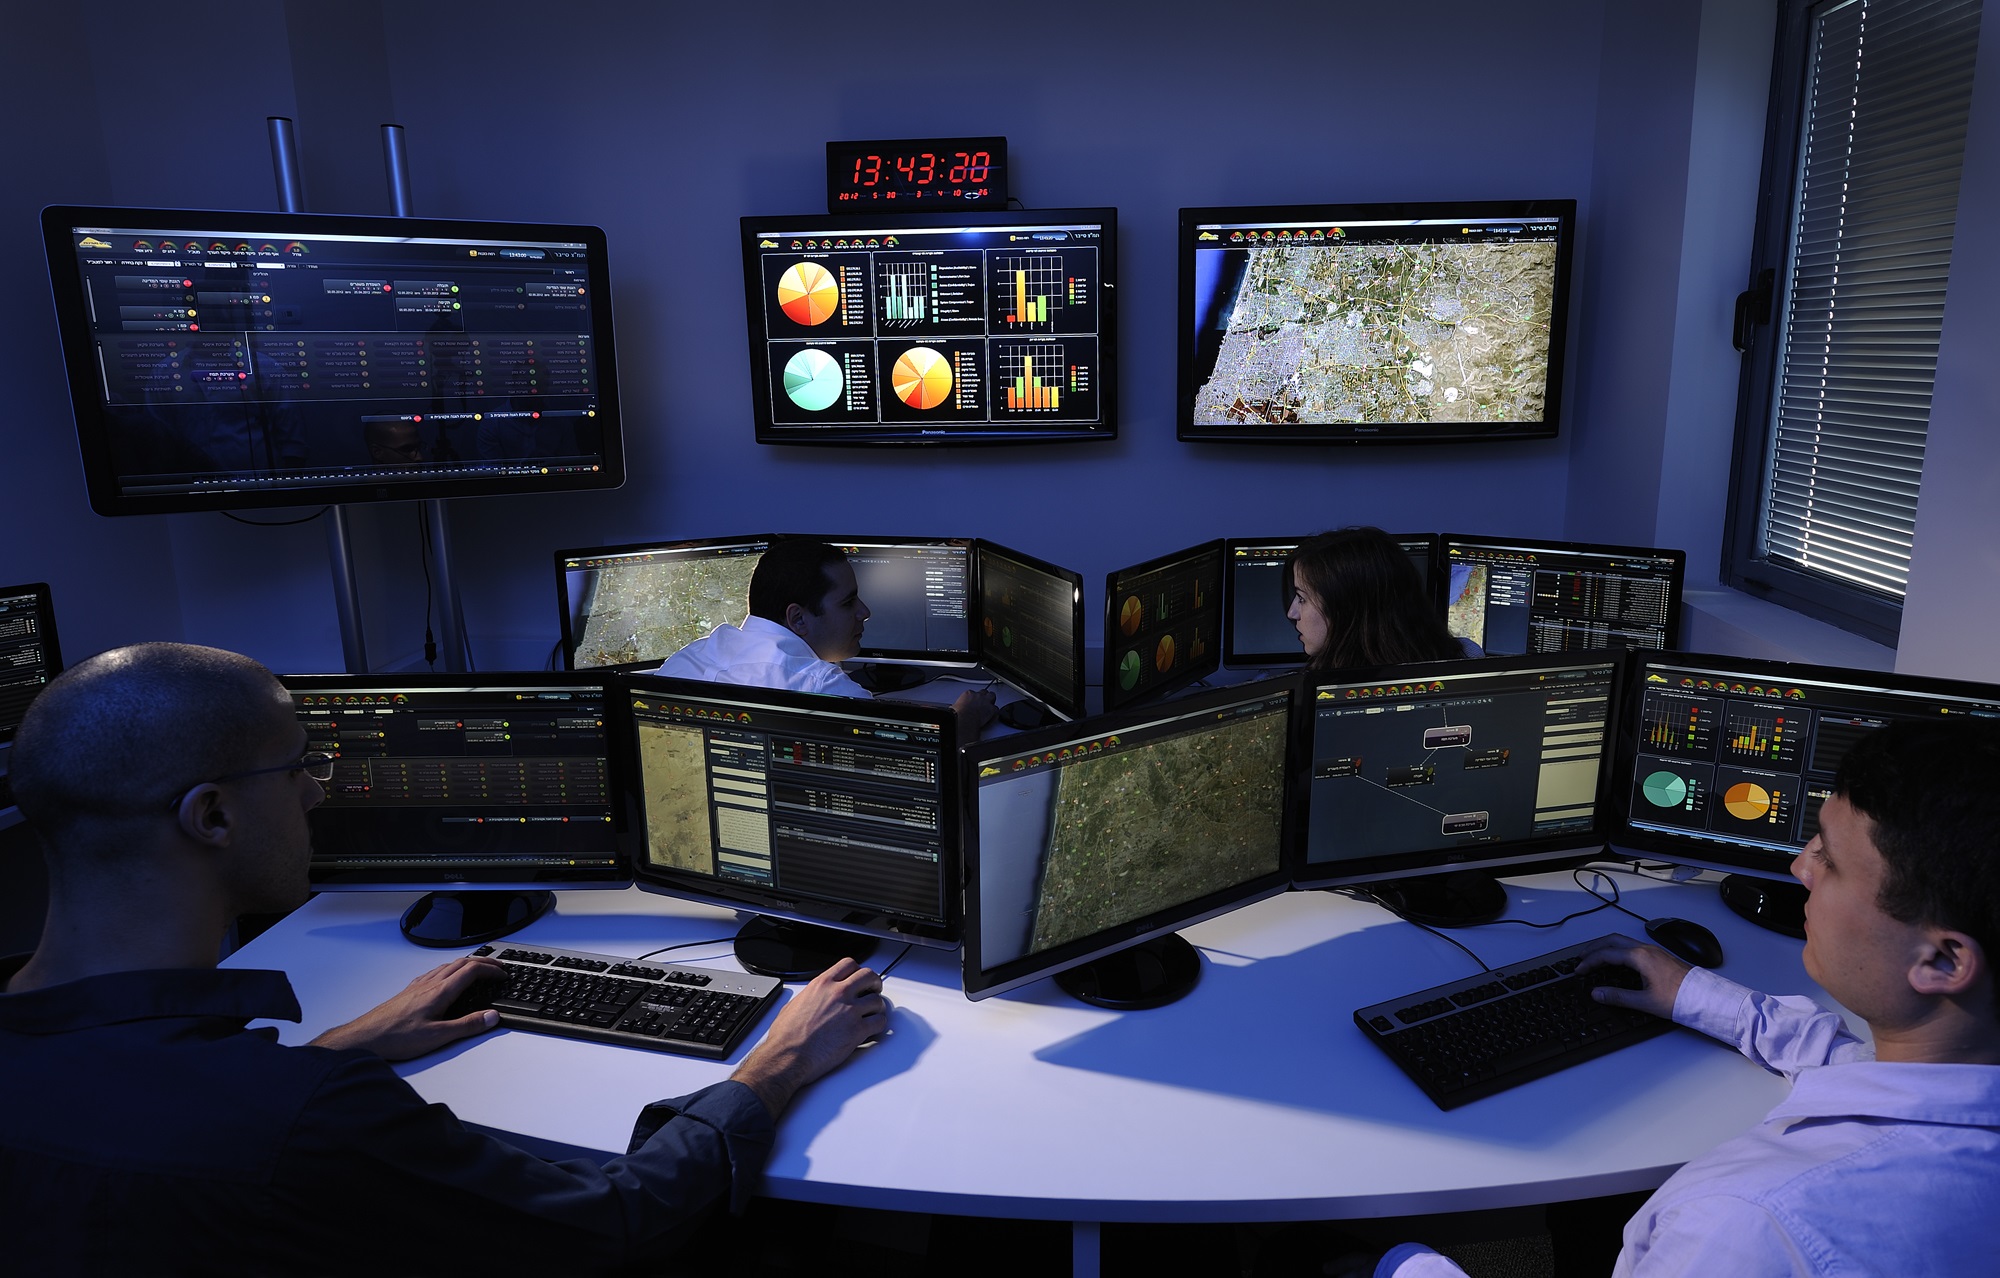 Cyber Intelligence, a subsidiary of Elbit Systems, has won an order from the Dutch National Police for a Cyber Intelligence system. Part of Elbit Systems’ Intelligence 360 suite of Cyber capabilities, the solution to be supplied is designed to provide high-availability and scalability and enable customization with work-flow, legislation and other custom requirements of the Dutch National Police.. Click to enlarge.